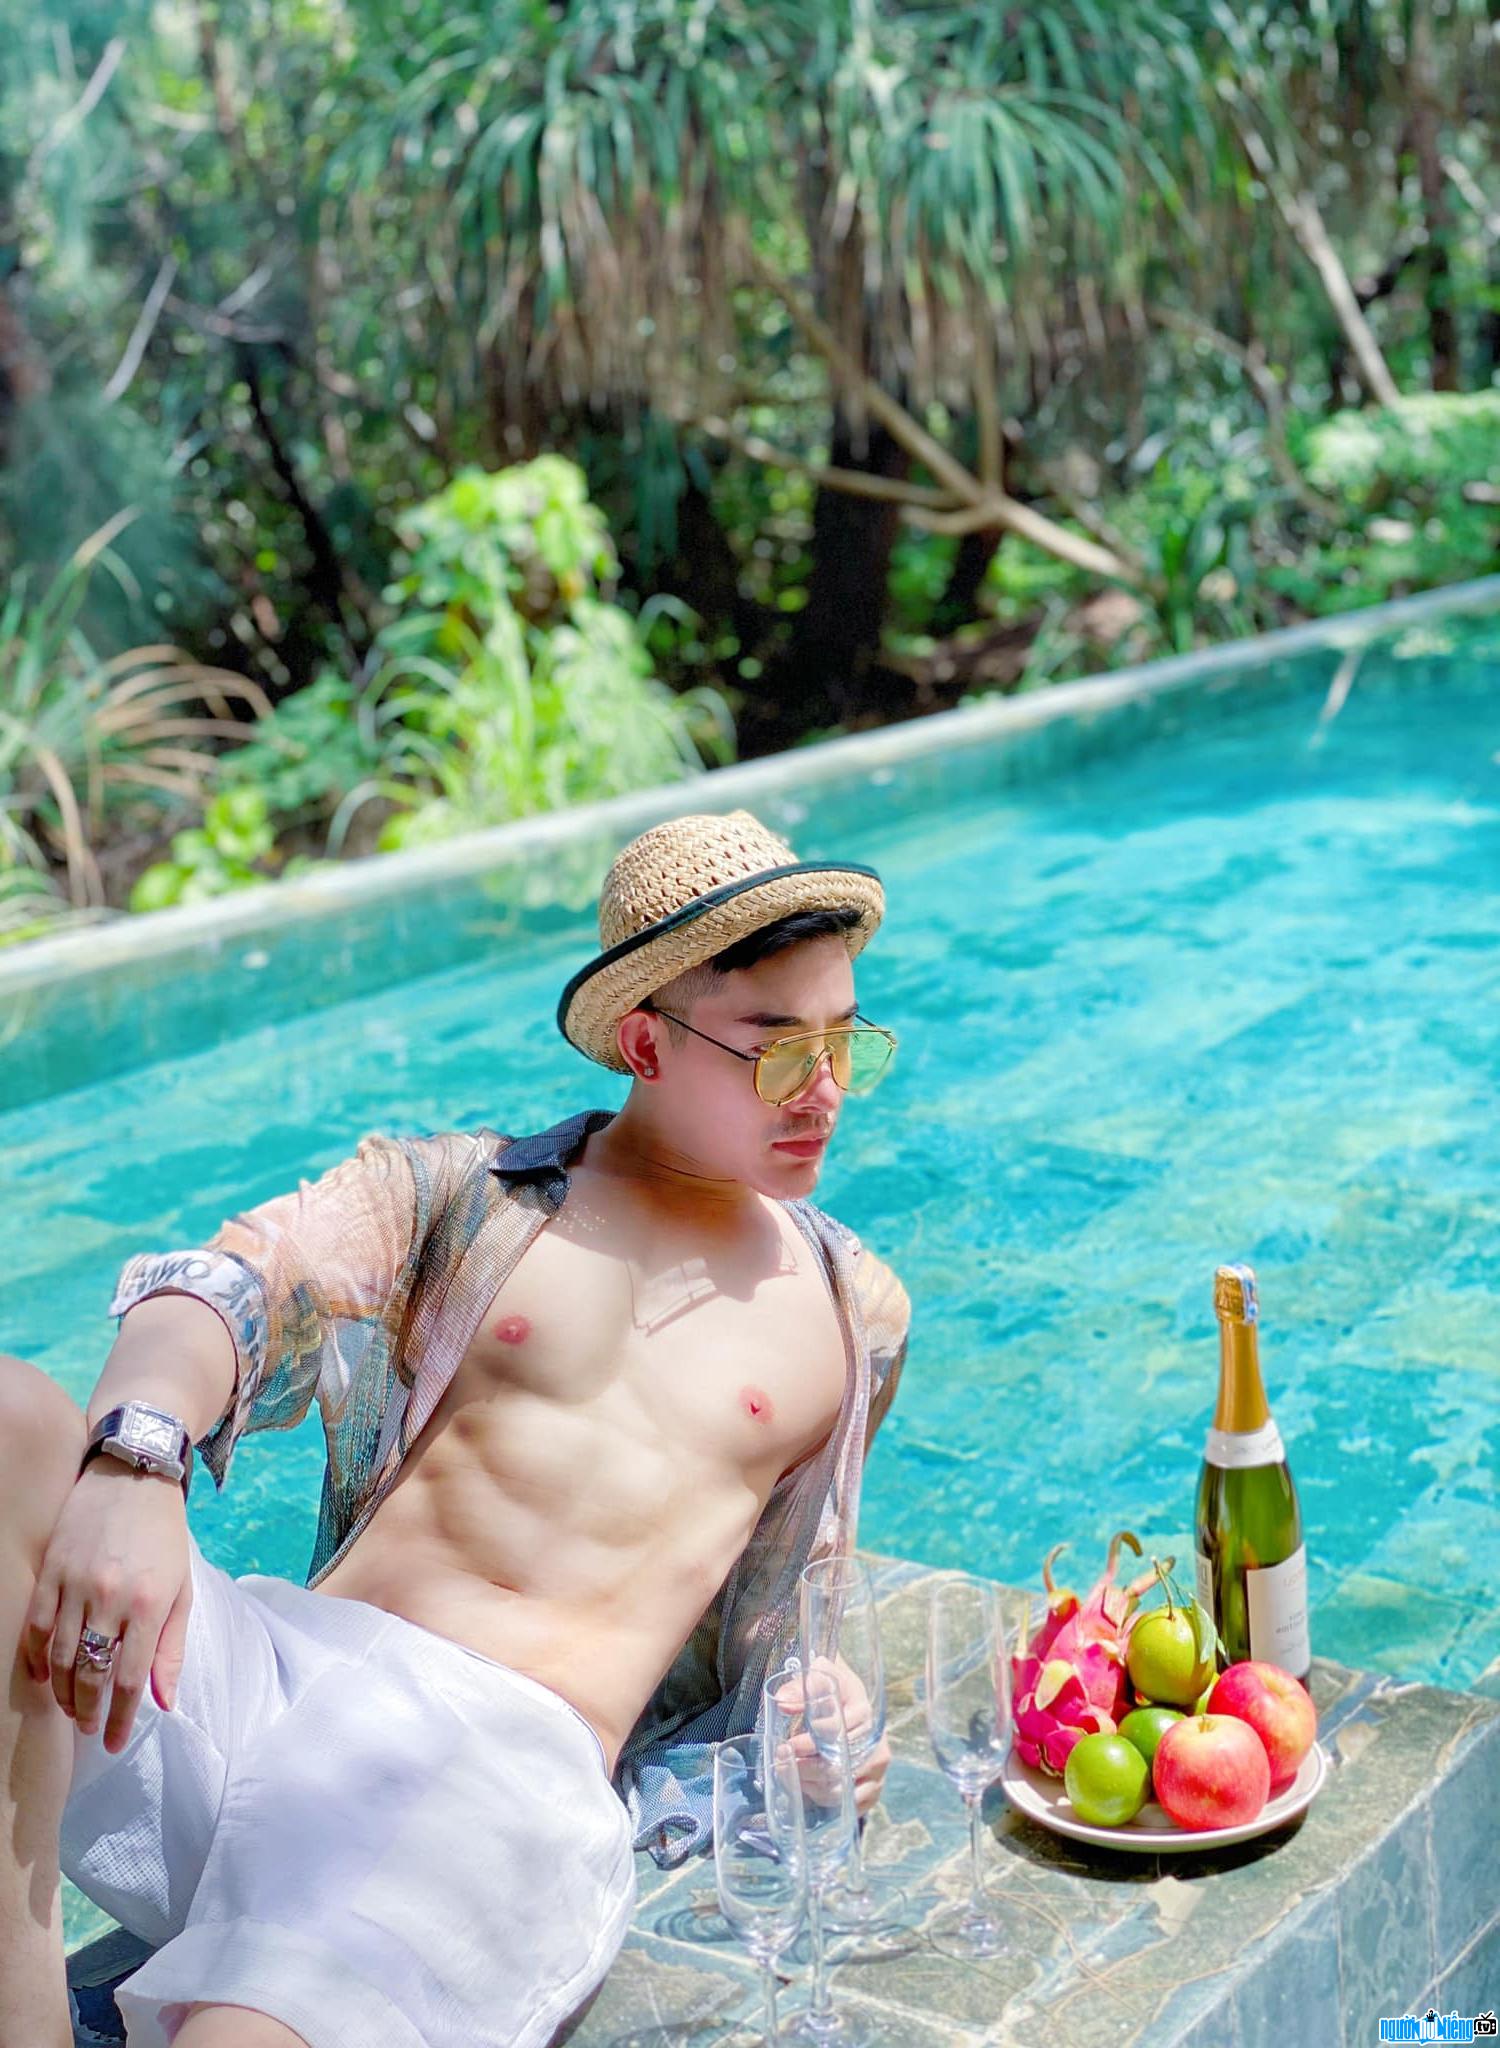  Hoang Tung showing off his 6-pack muscles